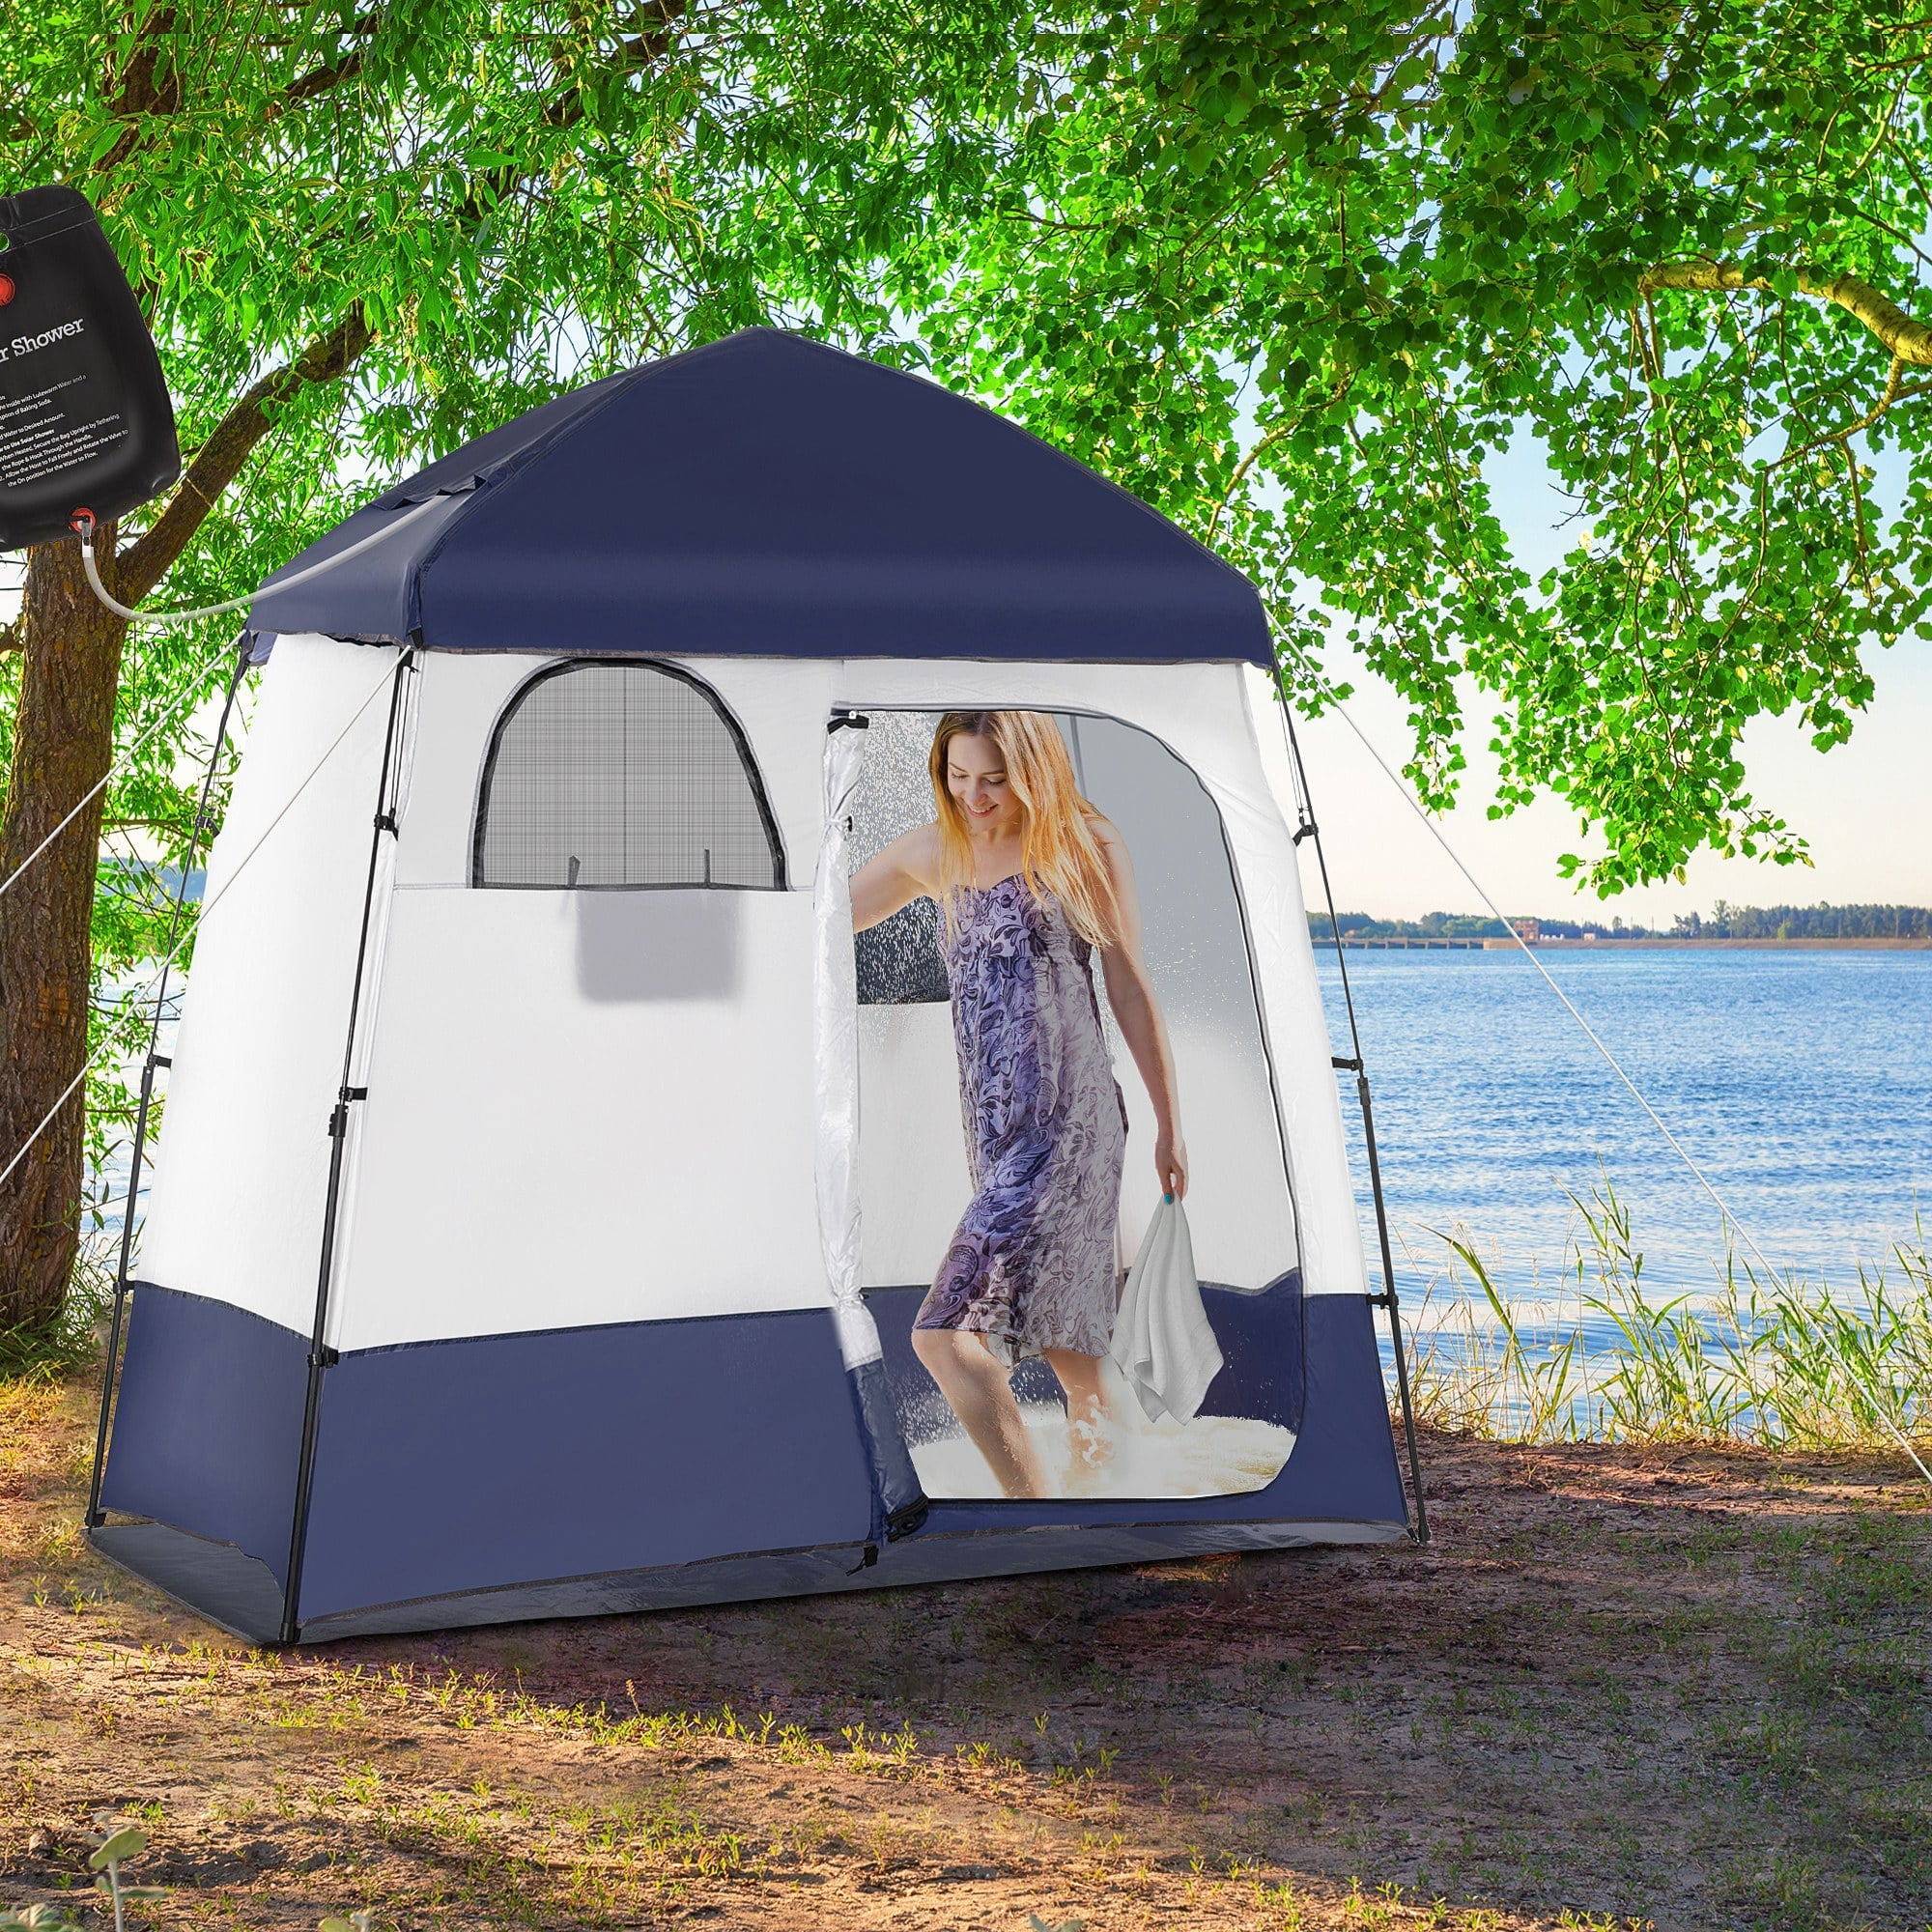 Outsunny Shower Tent, Pop Up Privacy Shelter for Camping, Dressing Changing Room, Portable Instant Outdoor Shower Tent Enclosure w/ 2 Rooms, Shower Bag, Floor and Carrying Bag, Blue